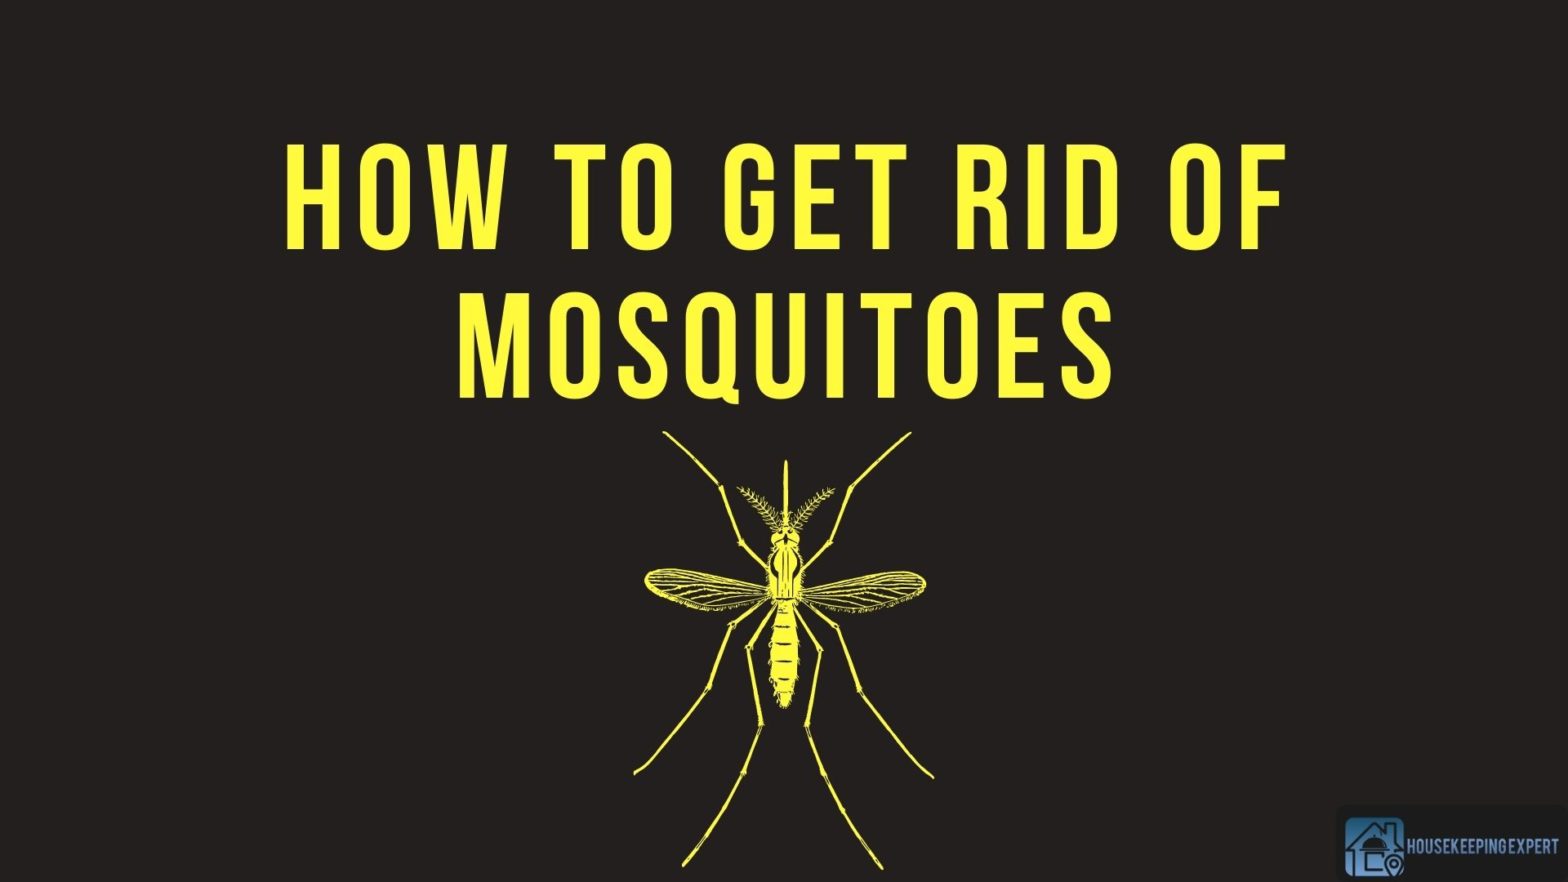 How To Get Rid Of Mosquitoes